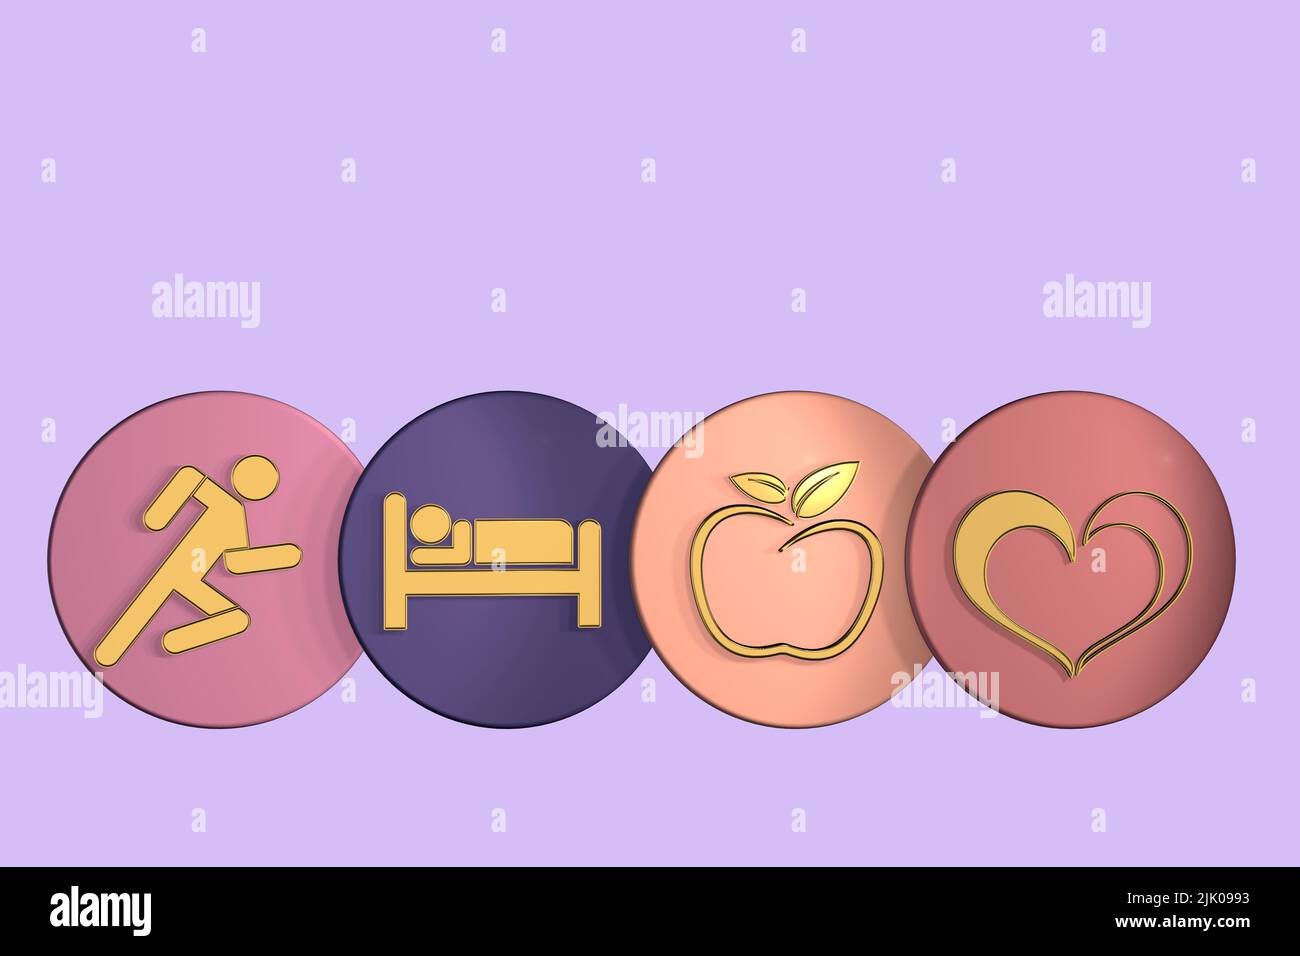 healthy lifestyle concept healthy living concept running excercise concept healthy diet concept healthy heart concept sleeping sleep concept eating Stock Photo